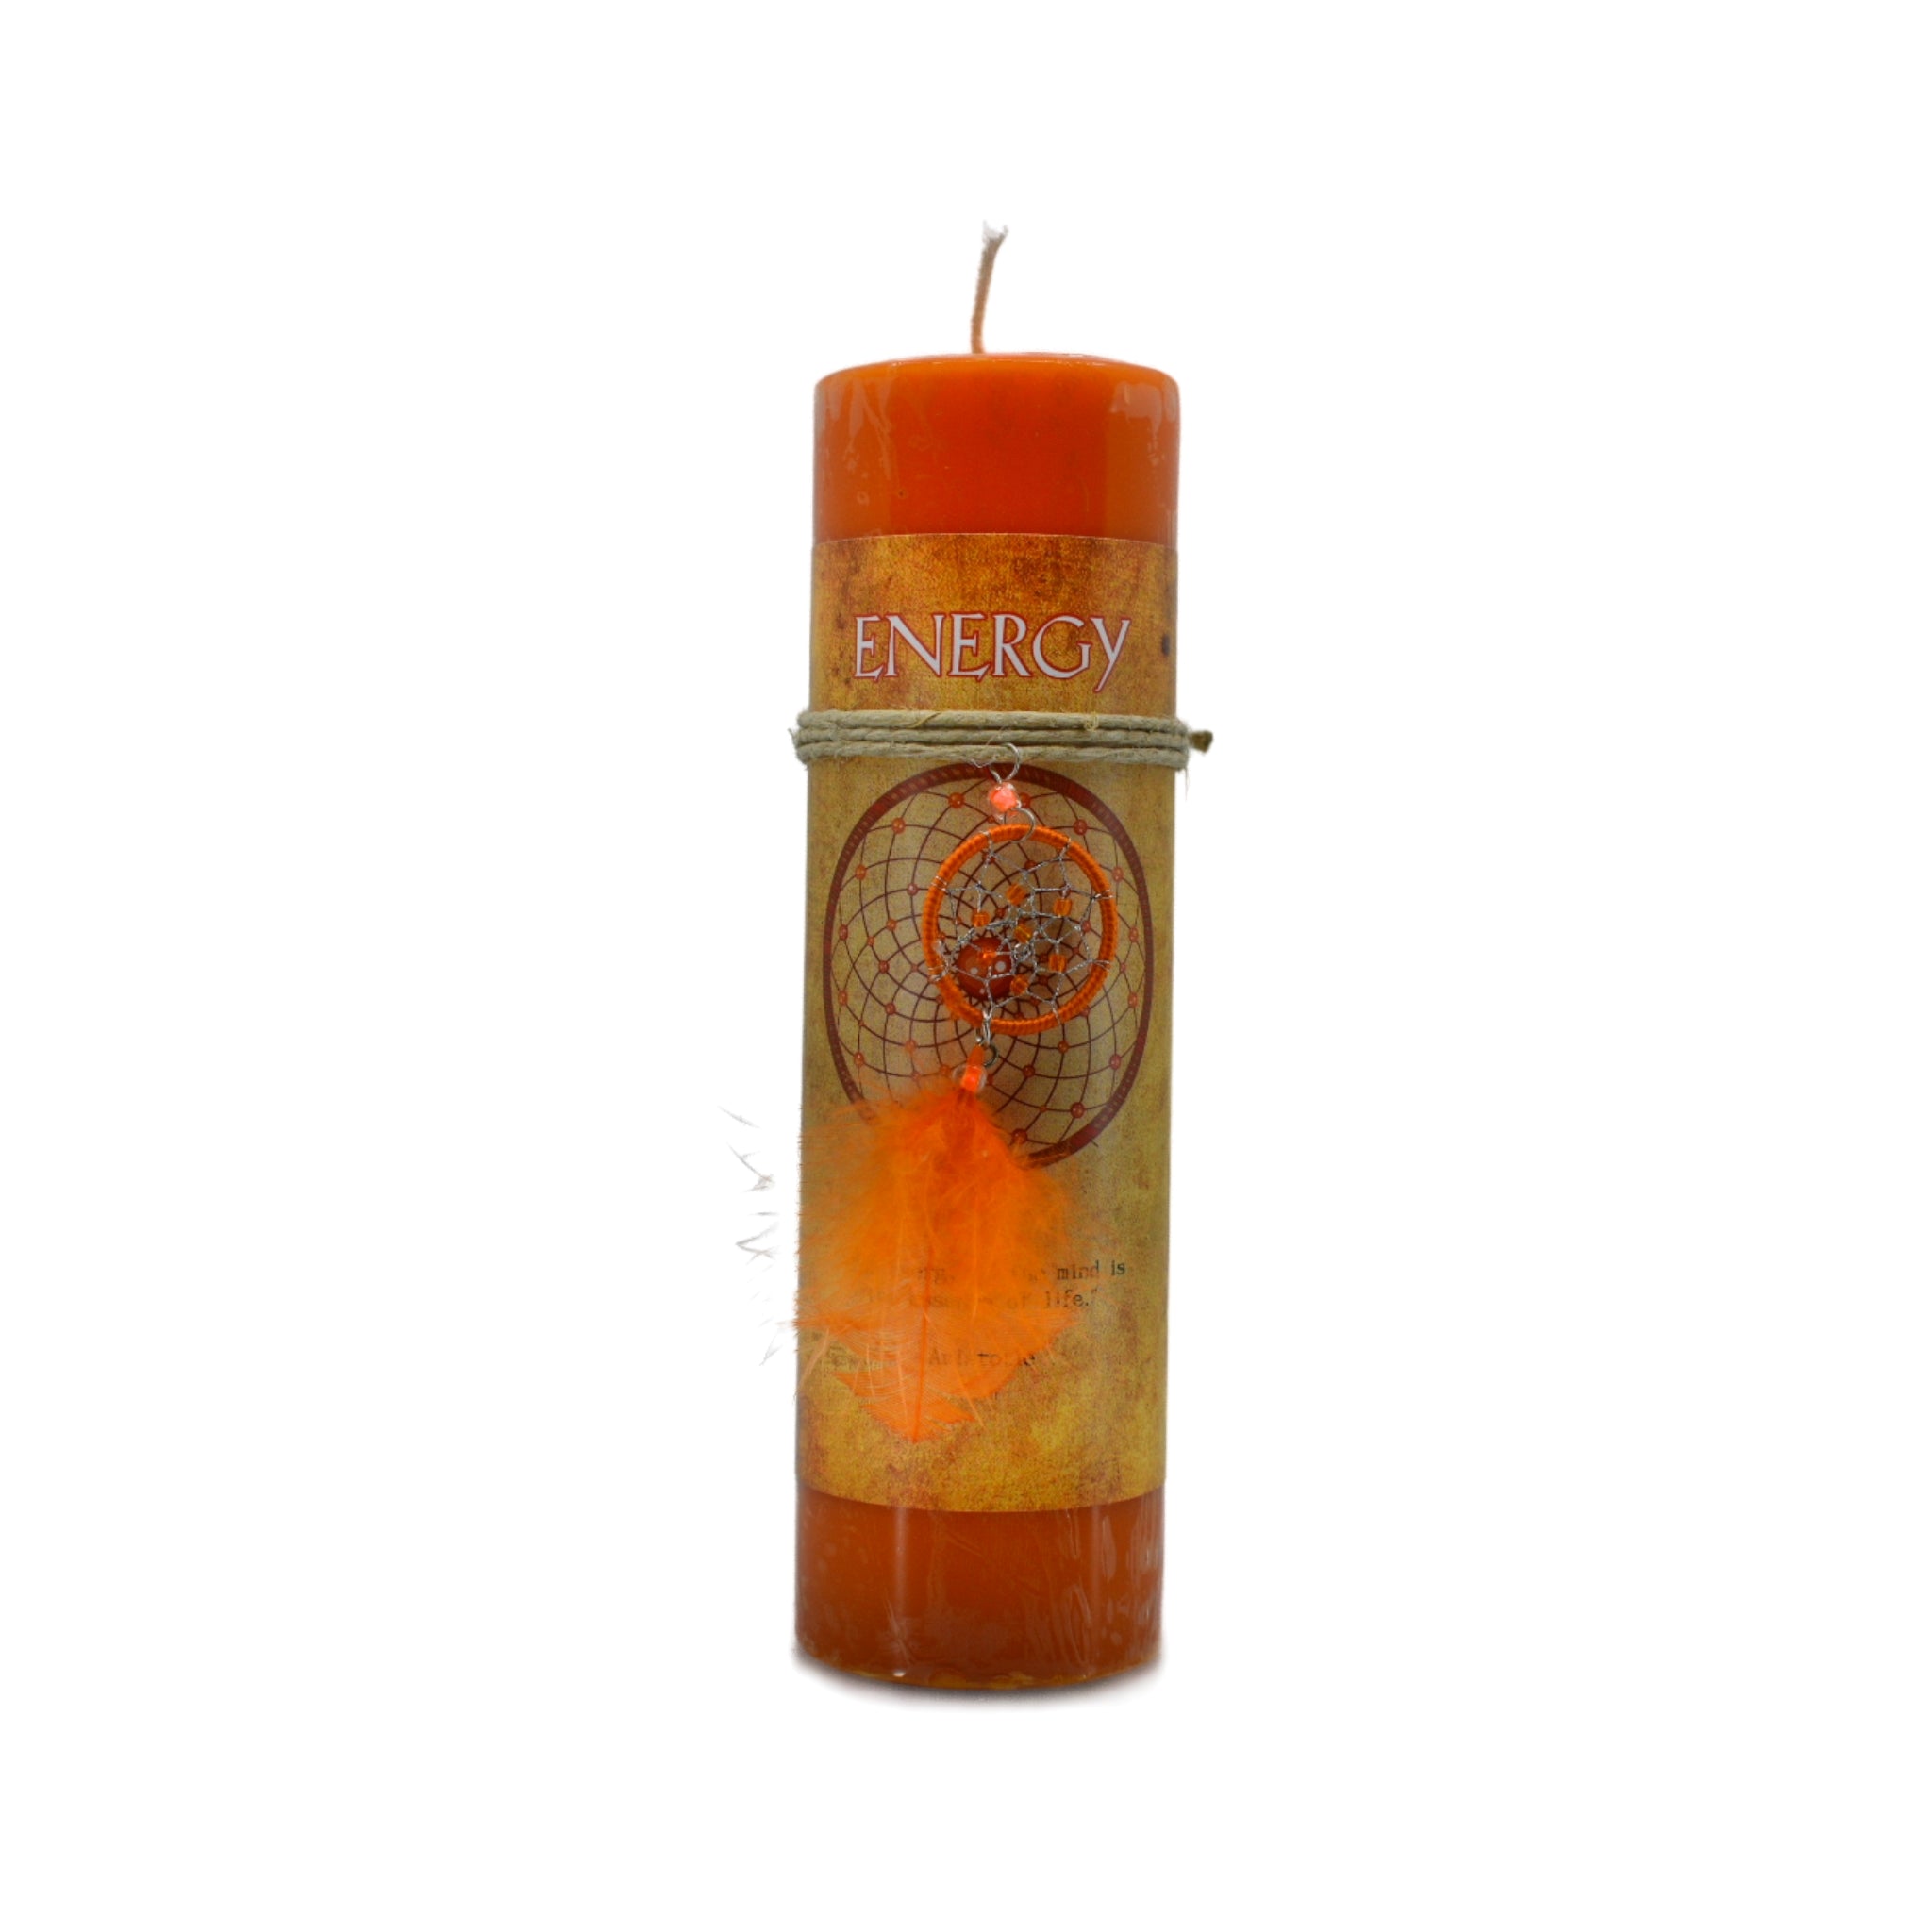 Energy Dream Catcher Candle.  Dream catcher is beaded and feathered.  It is not made by Native Americans.  The candle is orange color and scented.  